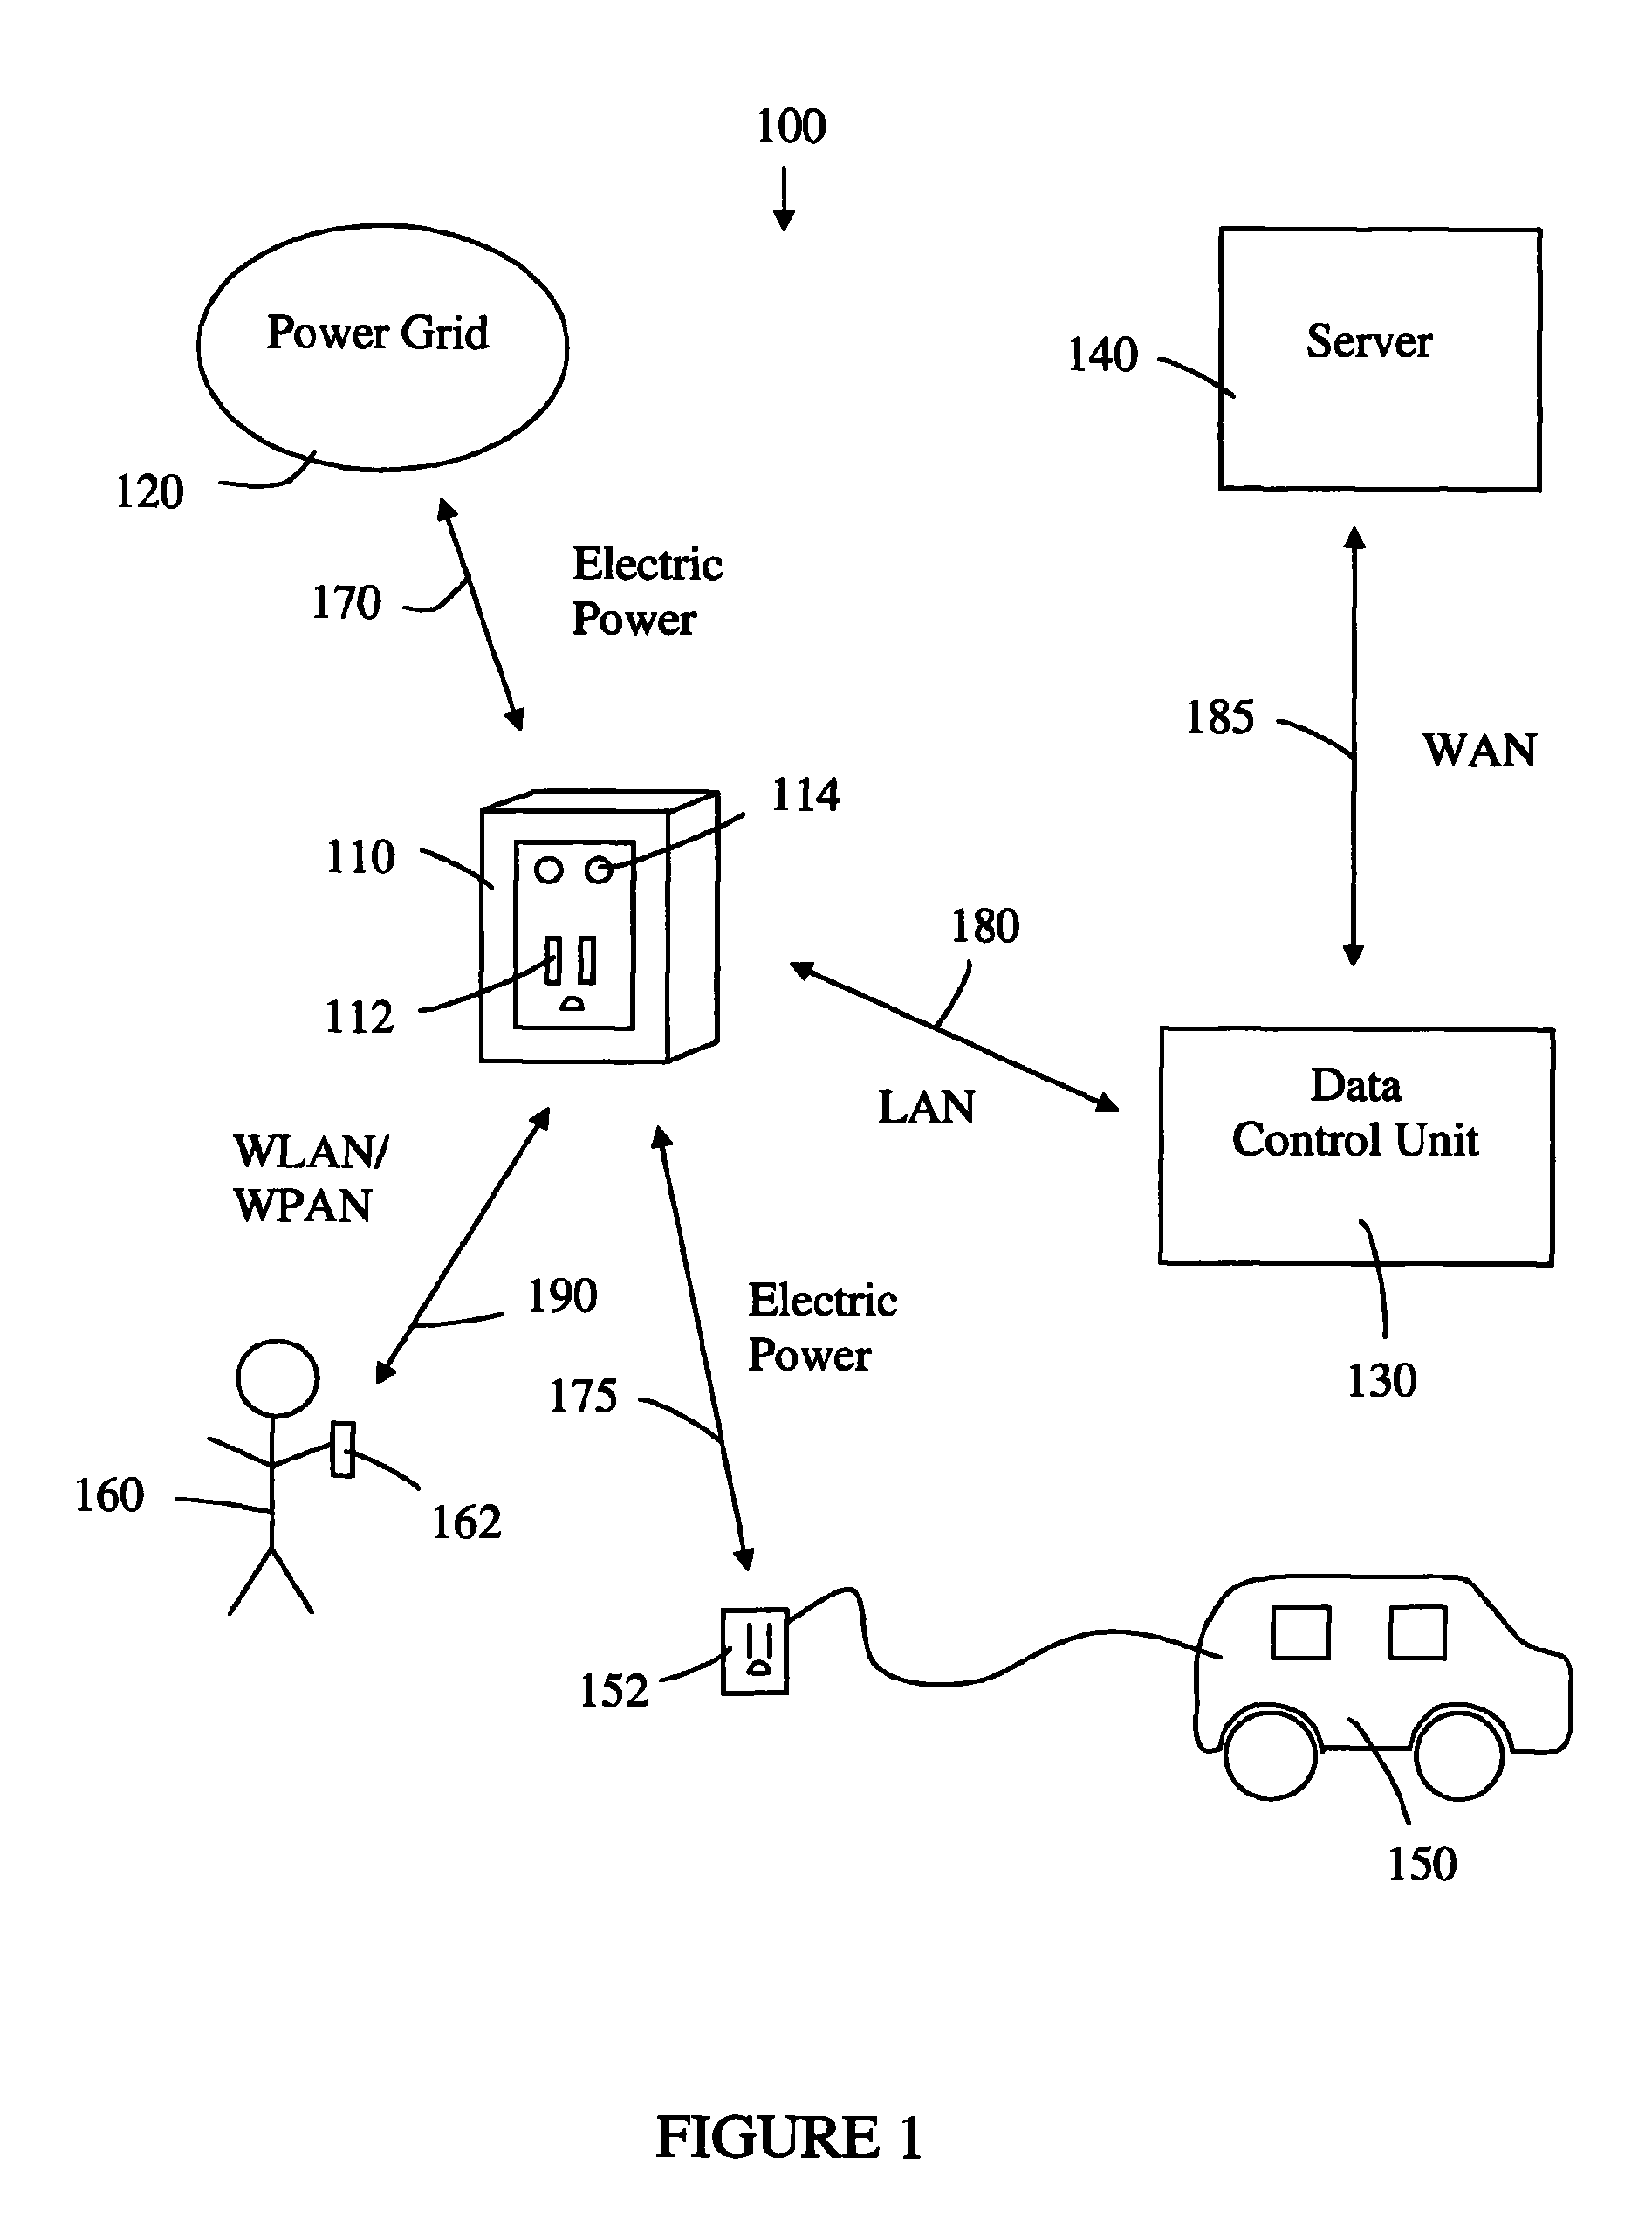 Network-controlled charging system for electric vehicles